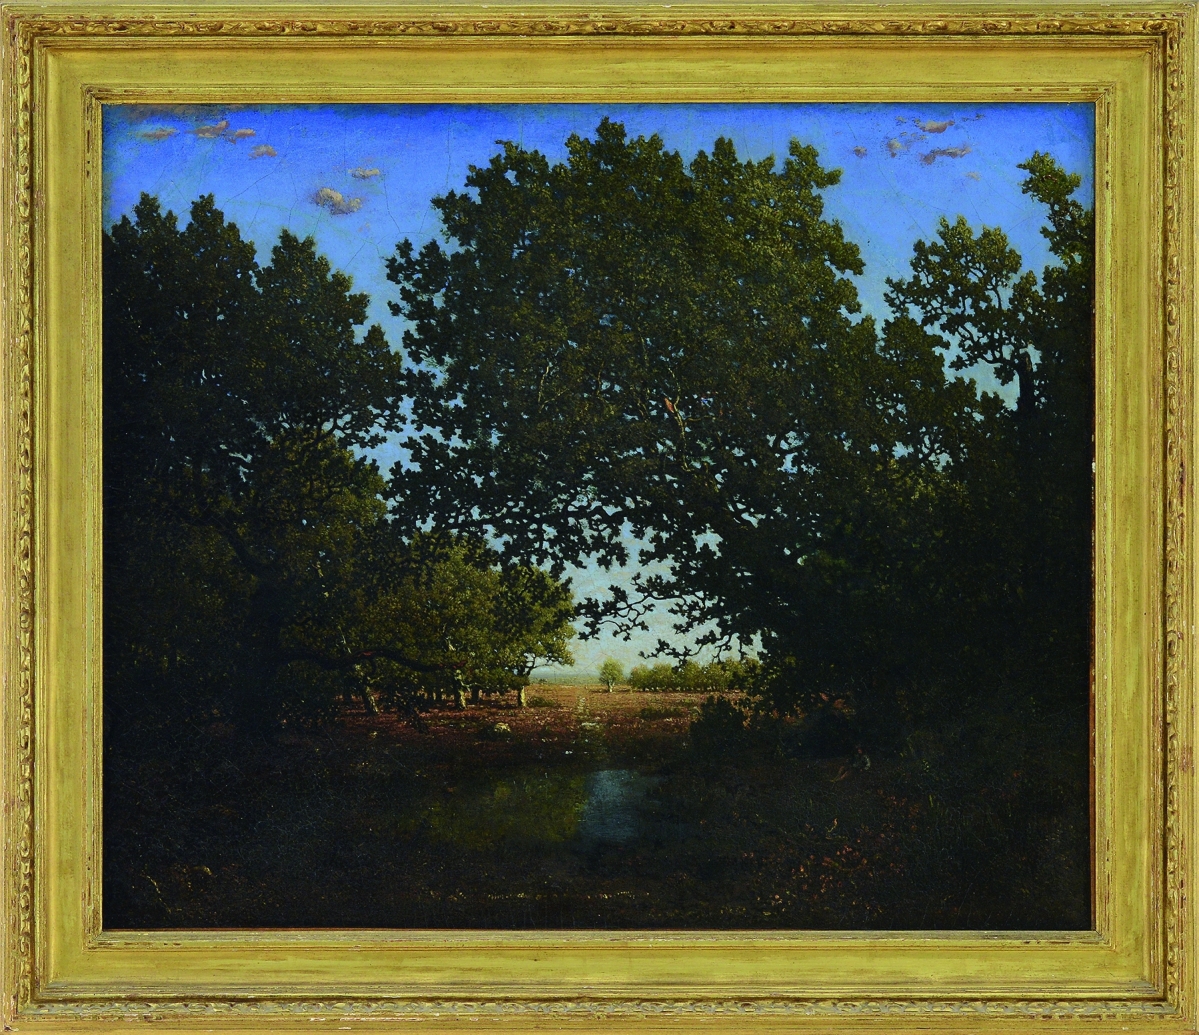 The $8,000 high estimate did not last long as active bidding drove the price for “Figure Beside Woodland Pool Looking Across to Pasture” to $60,500. This oil on canvas, attributed to Narcisse-Virgil Diazde La Pena, was housed in a carved giltwood frame with possibly a partial signature lower left. It measures 21½ by 25½ inches and the provenance lists the Webster Family Trust descended from the Rockefeller/Dodge Family.